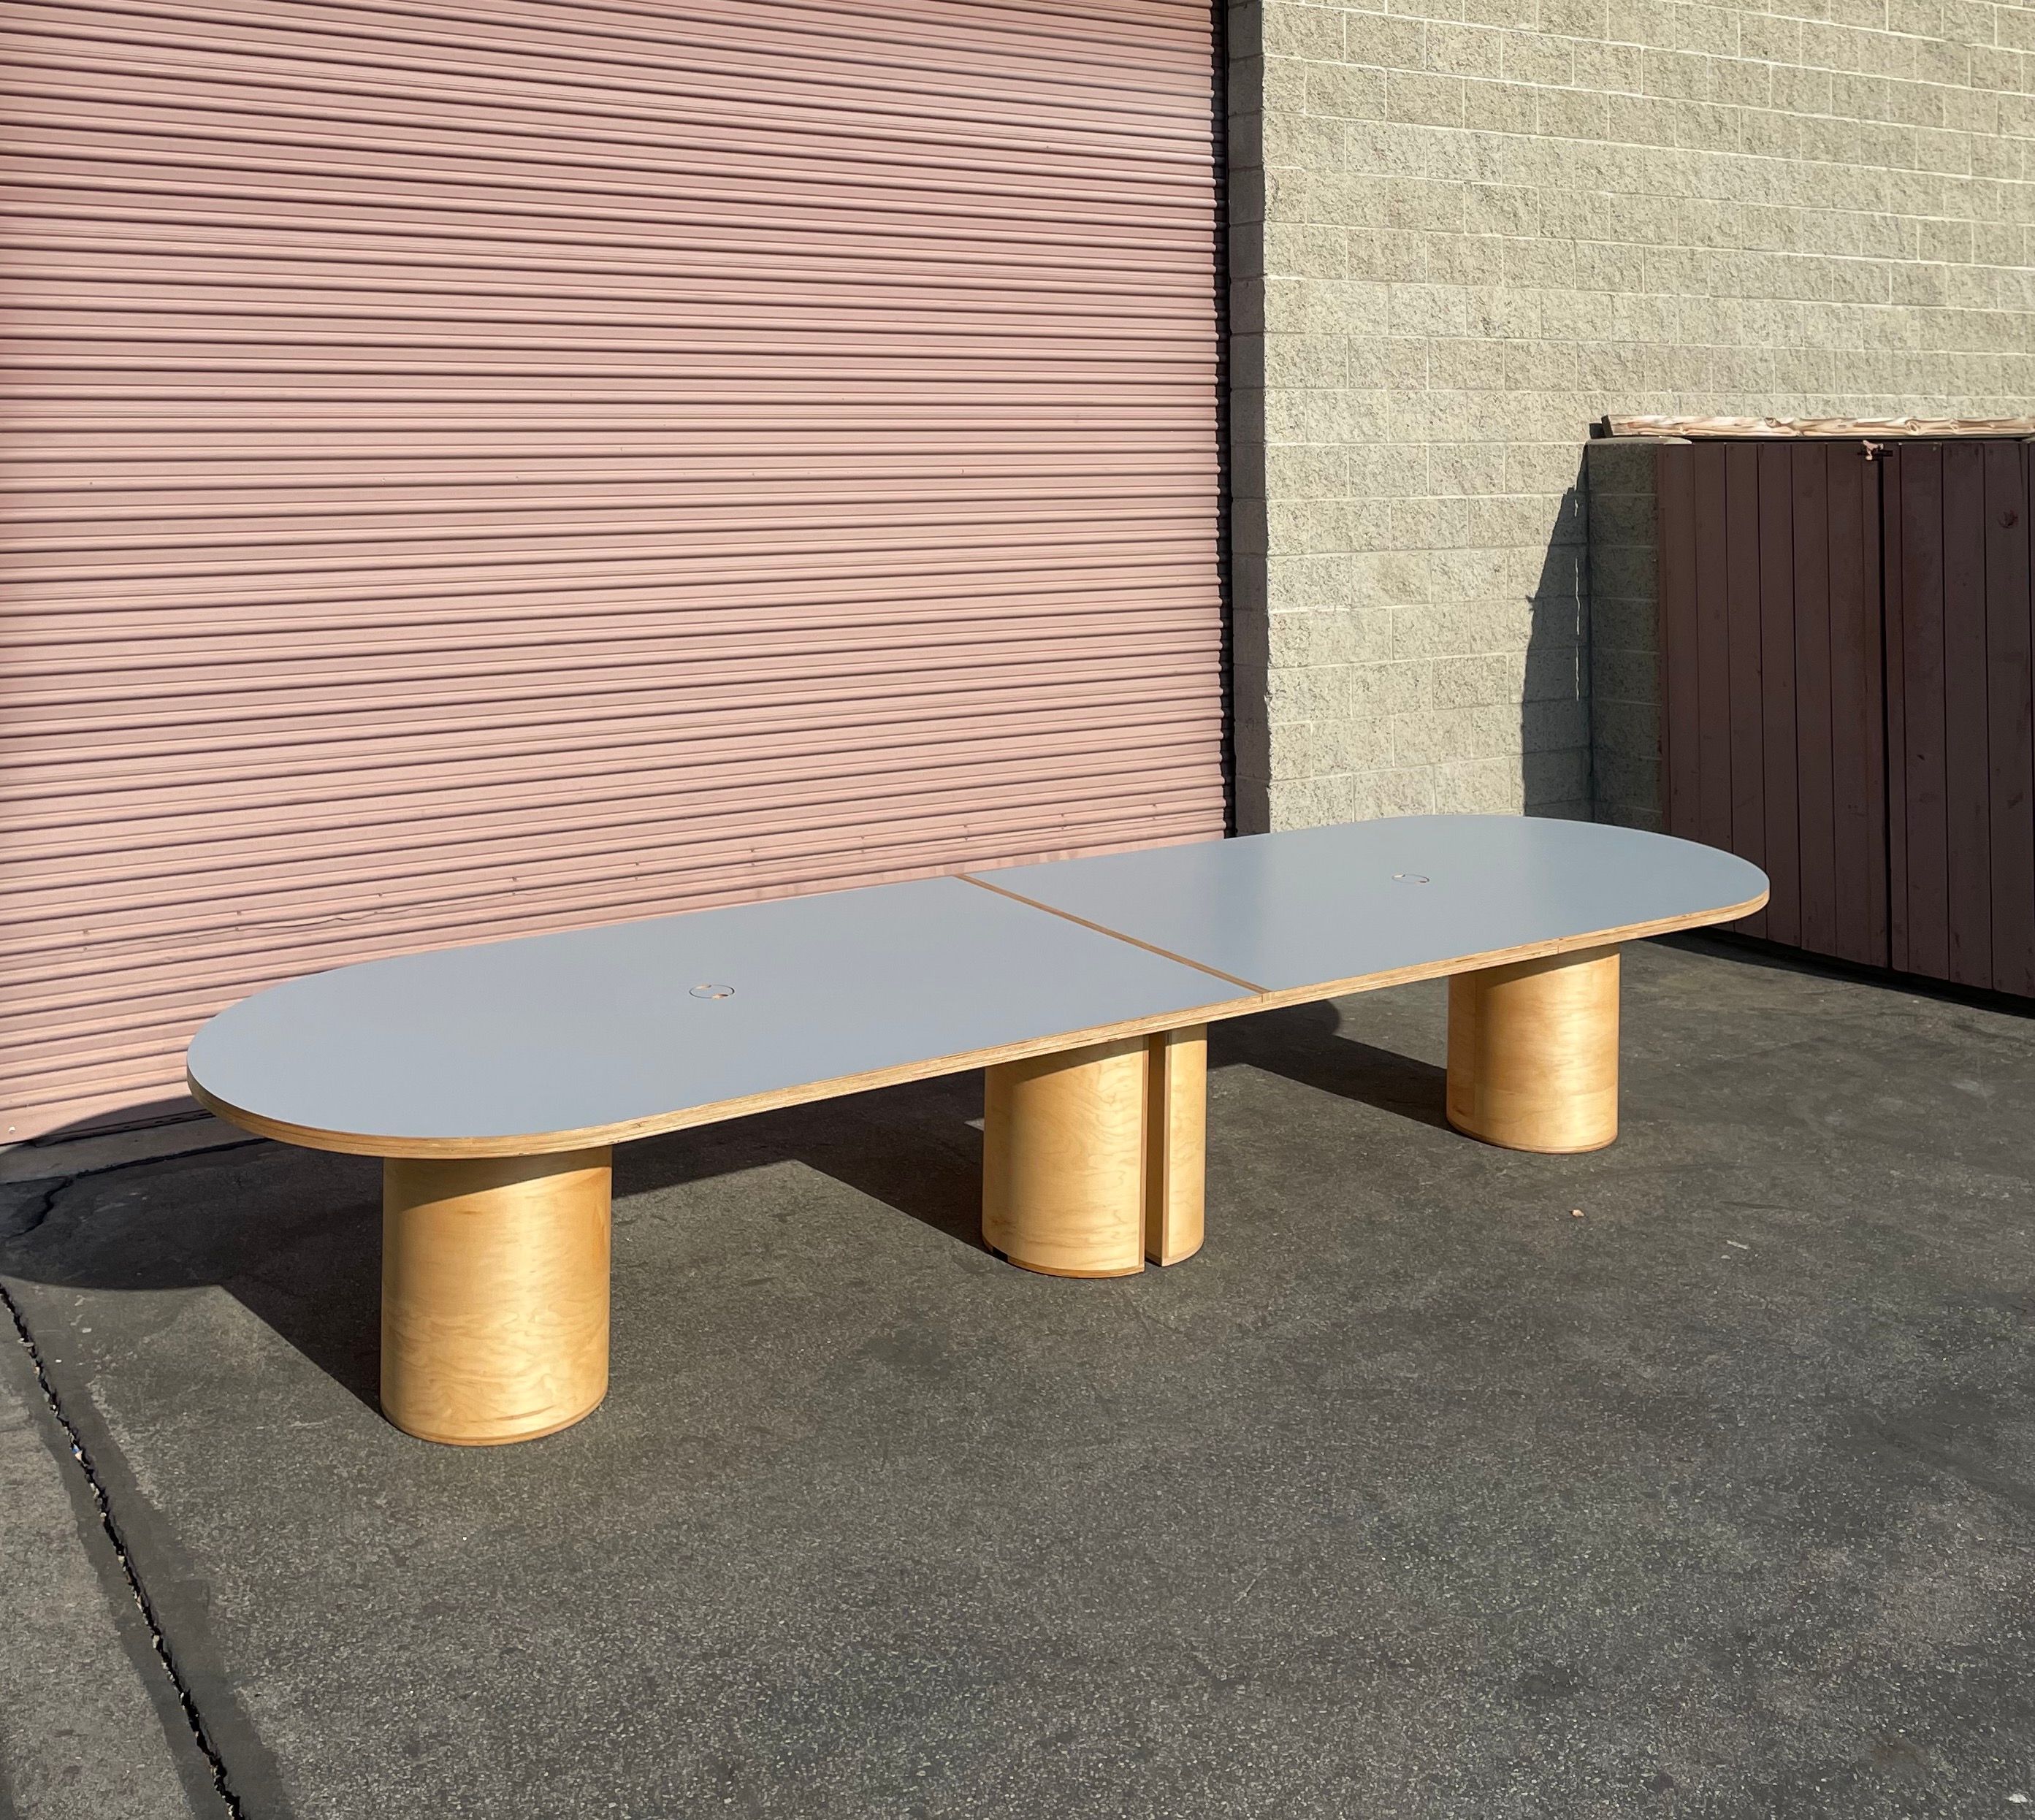  Conference Table - Annenberg Foundation product image 1